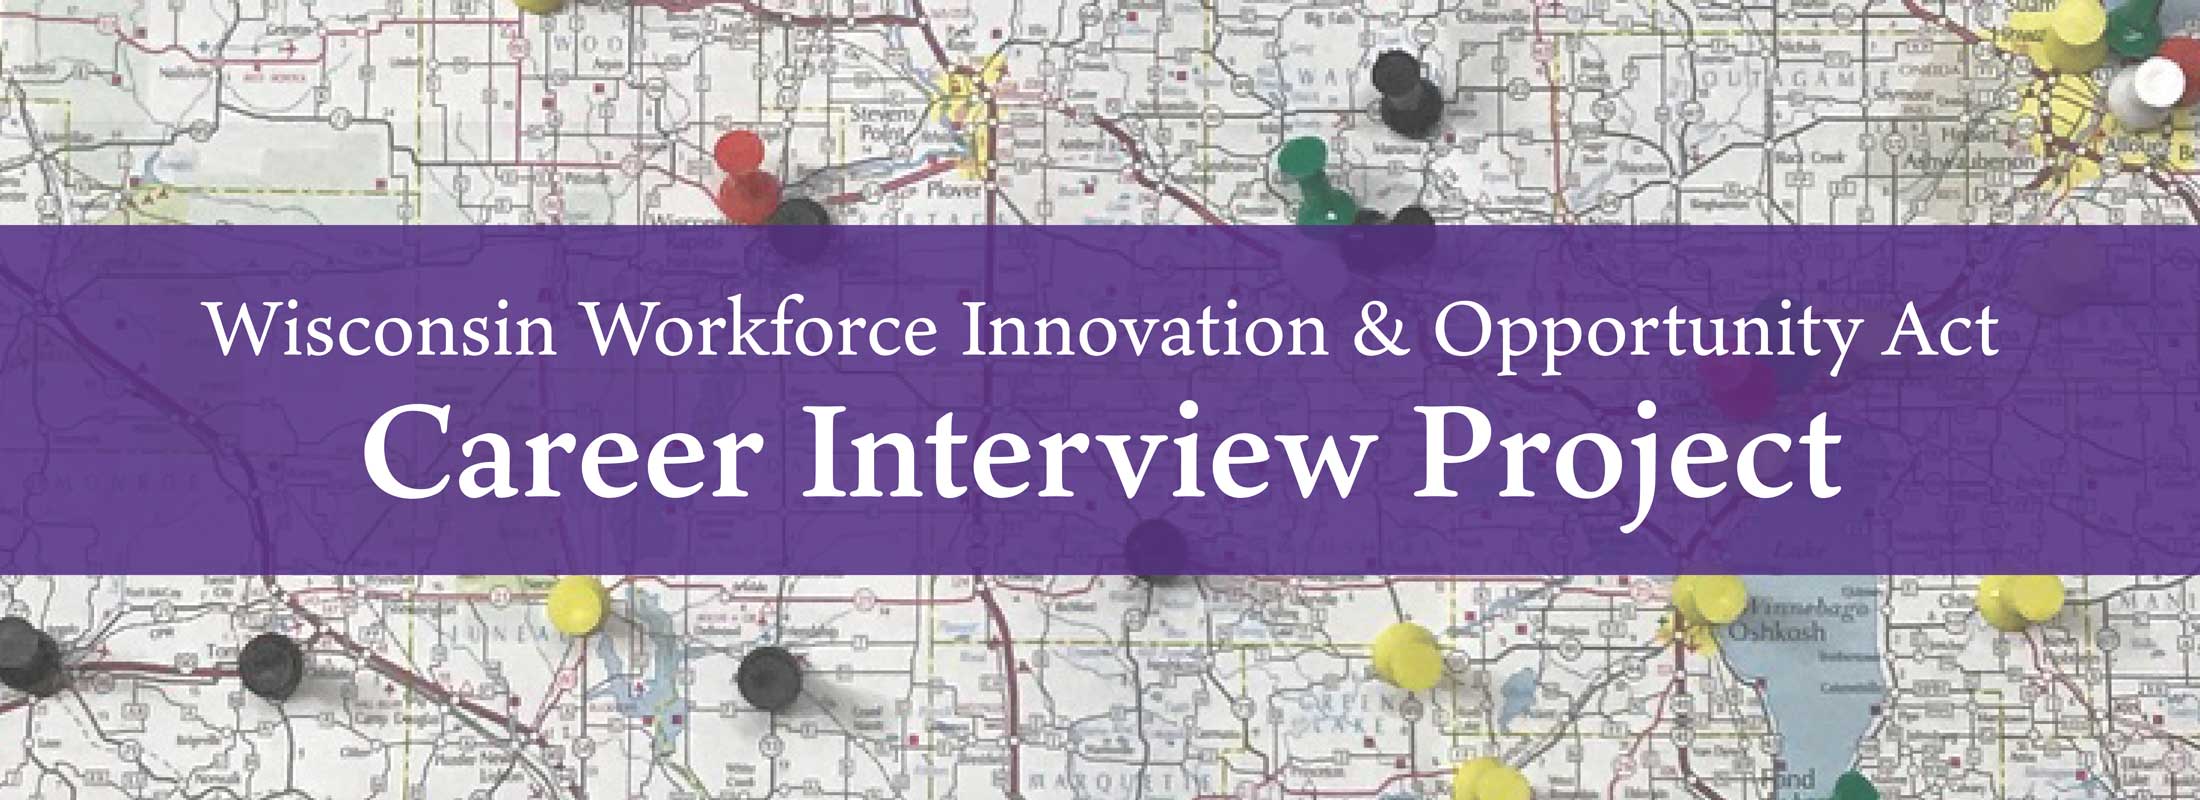 WIOA Career Interview Project Banner